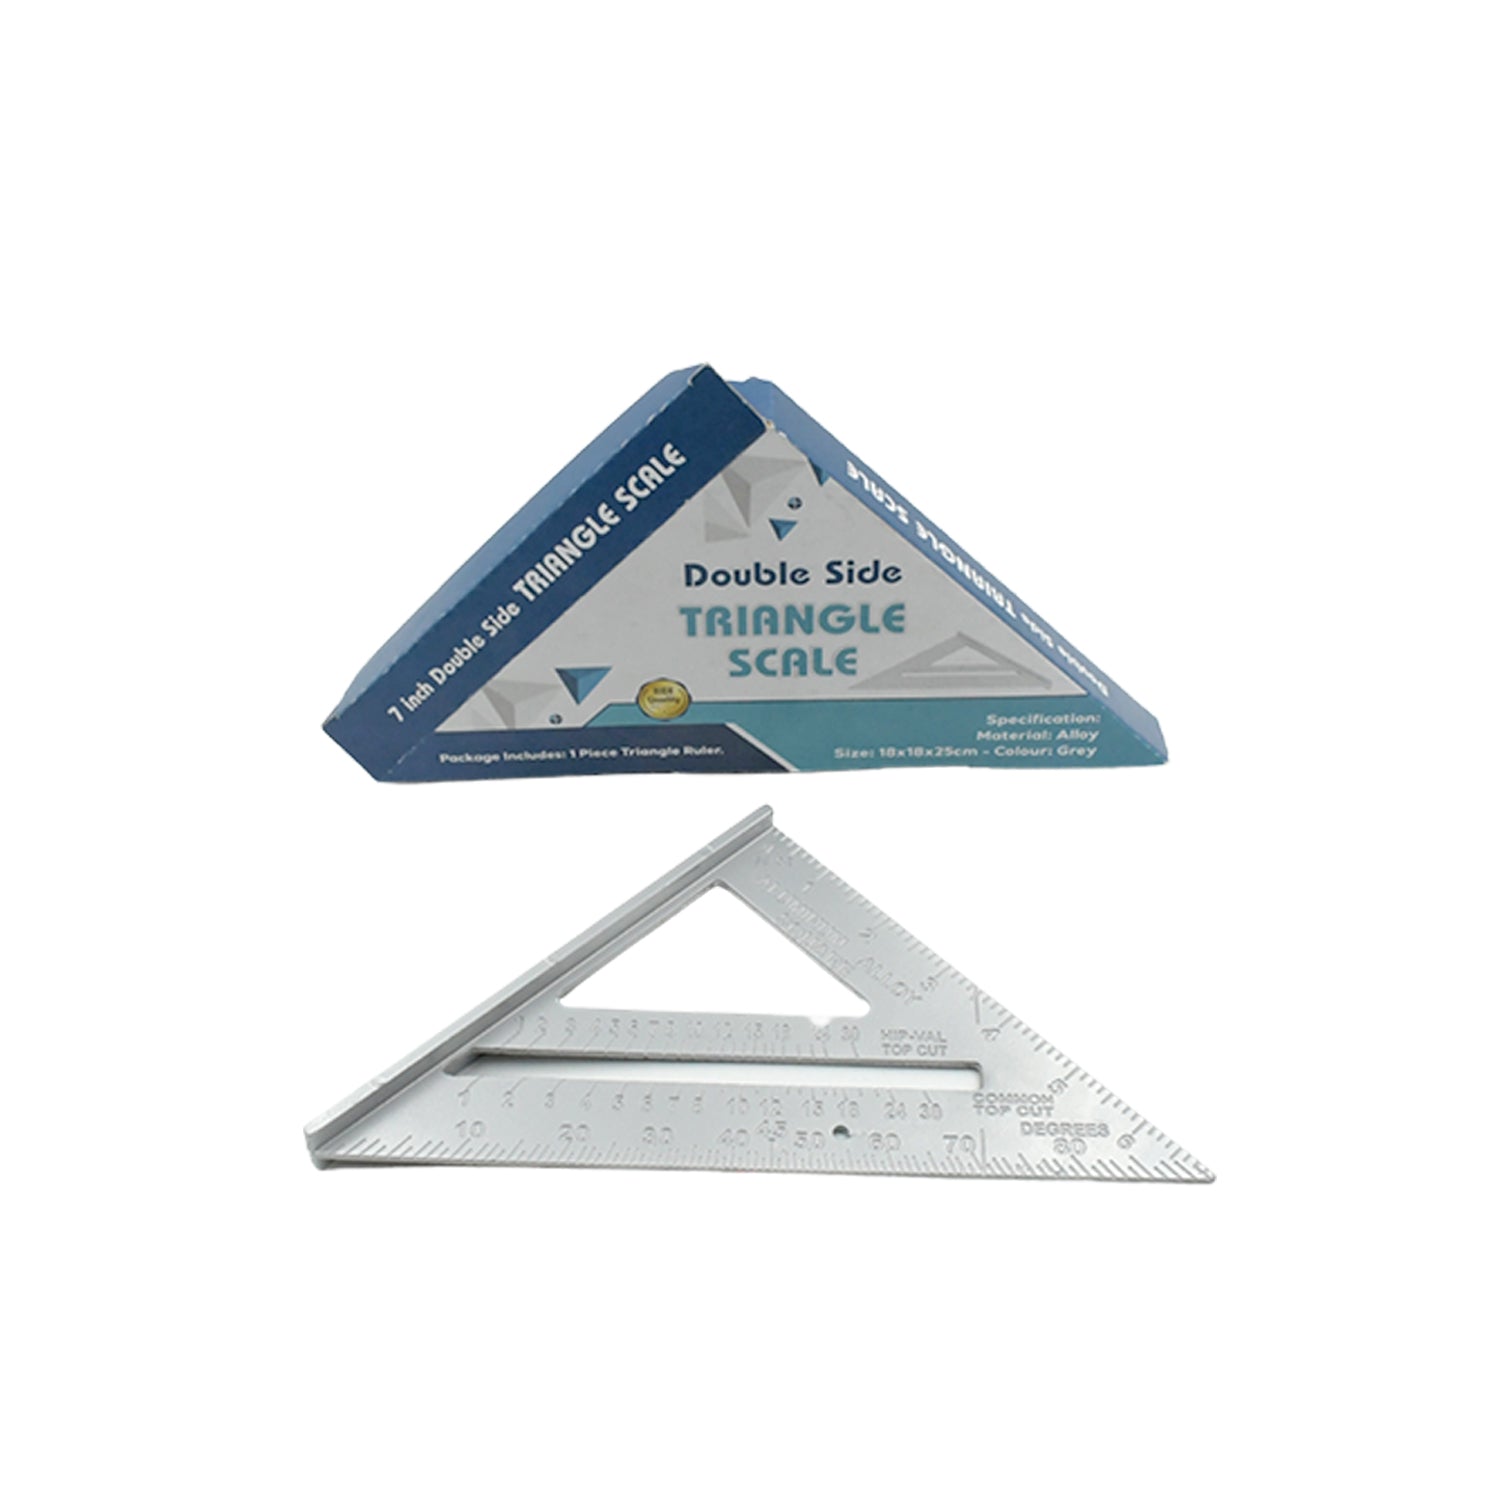 1559 Double Side Scale Triangle Measurement Hand Tool, 45 Degree Triangle Ruler, Home for Industry, Aluminum Alloy Rafter Square 7-Inch Length